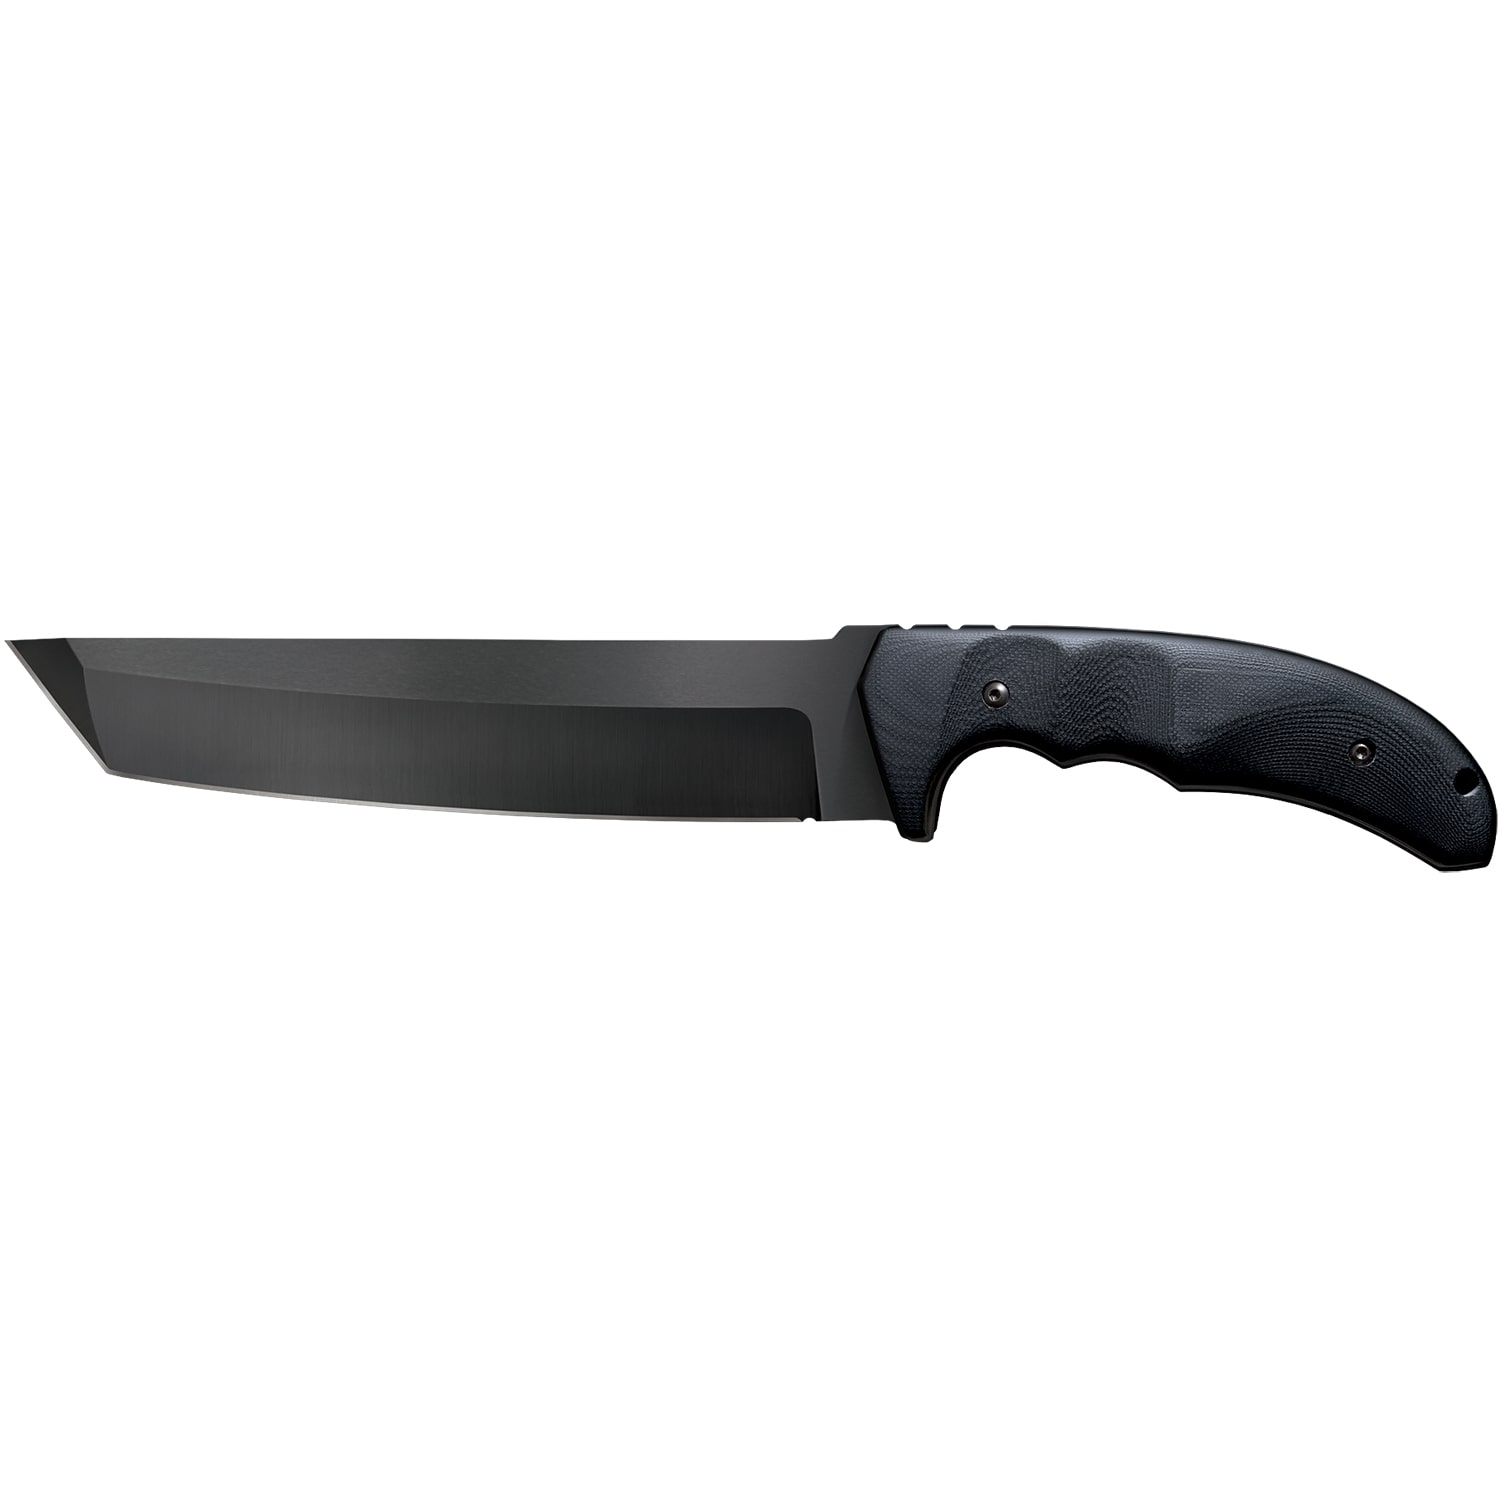 Cold Steel 7.5" Tanto Tactical Knife - image 4 of 5